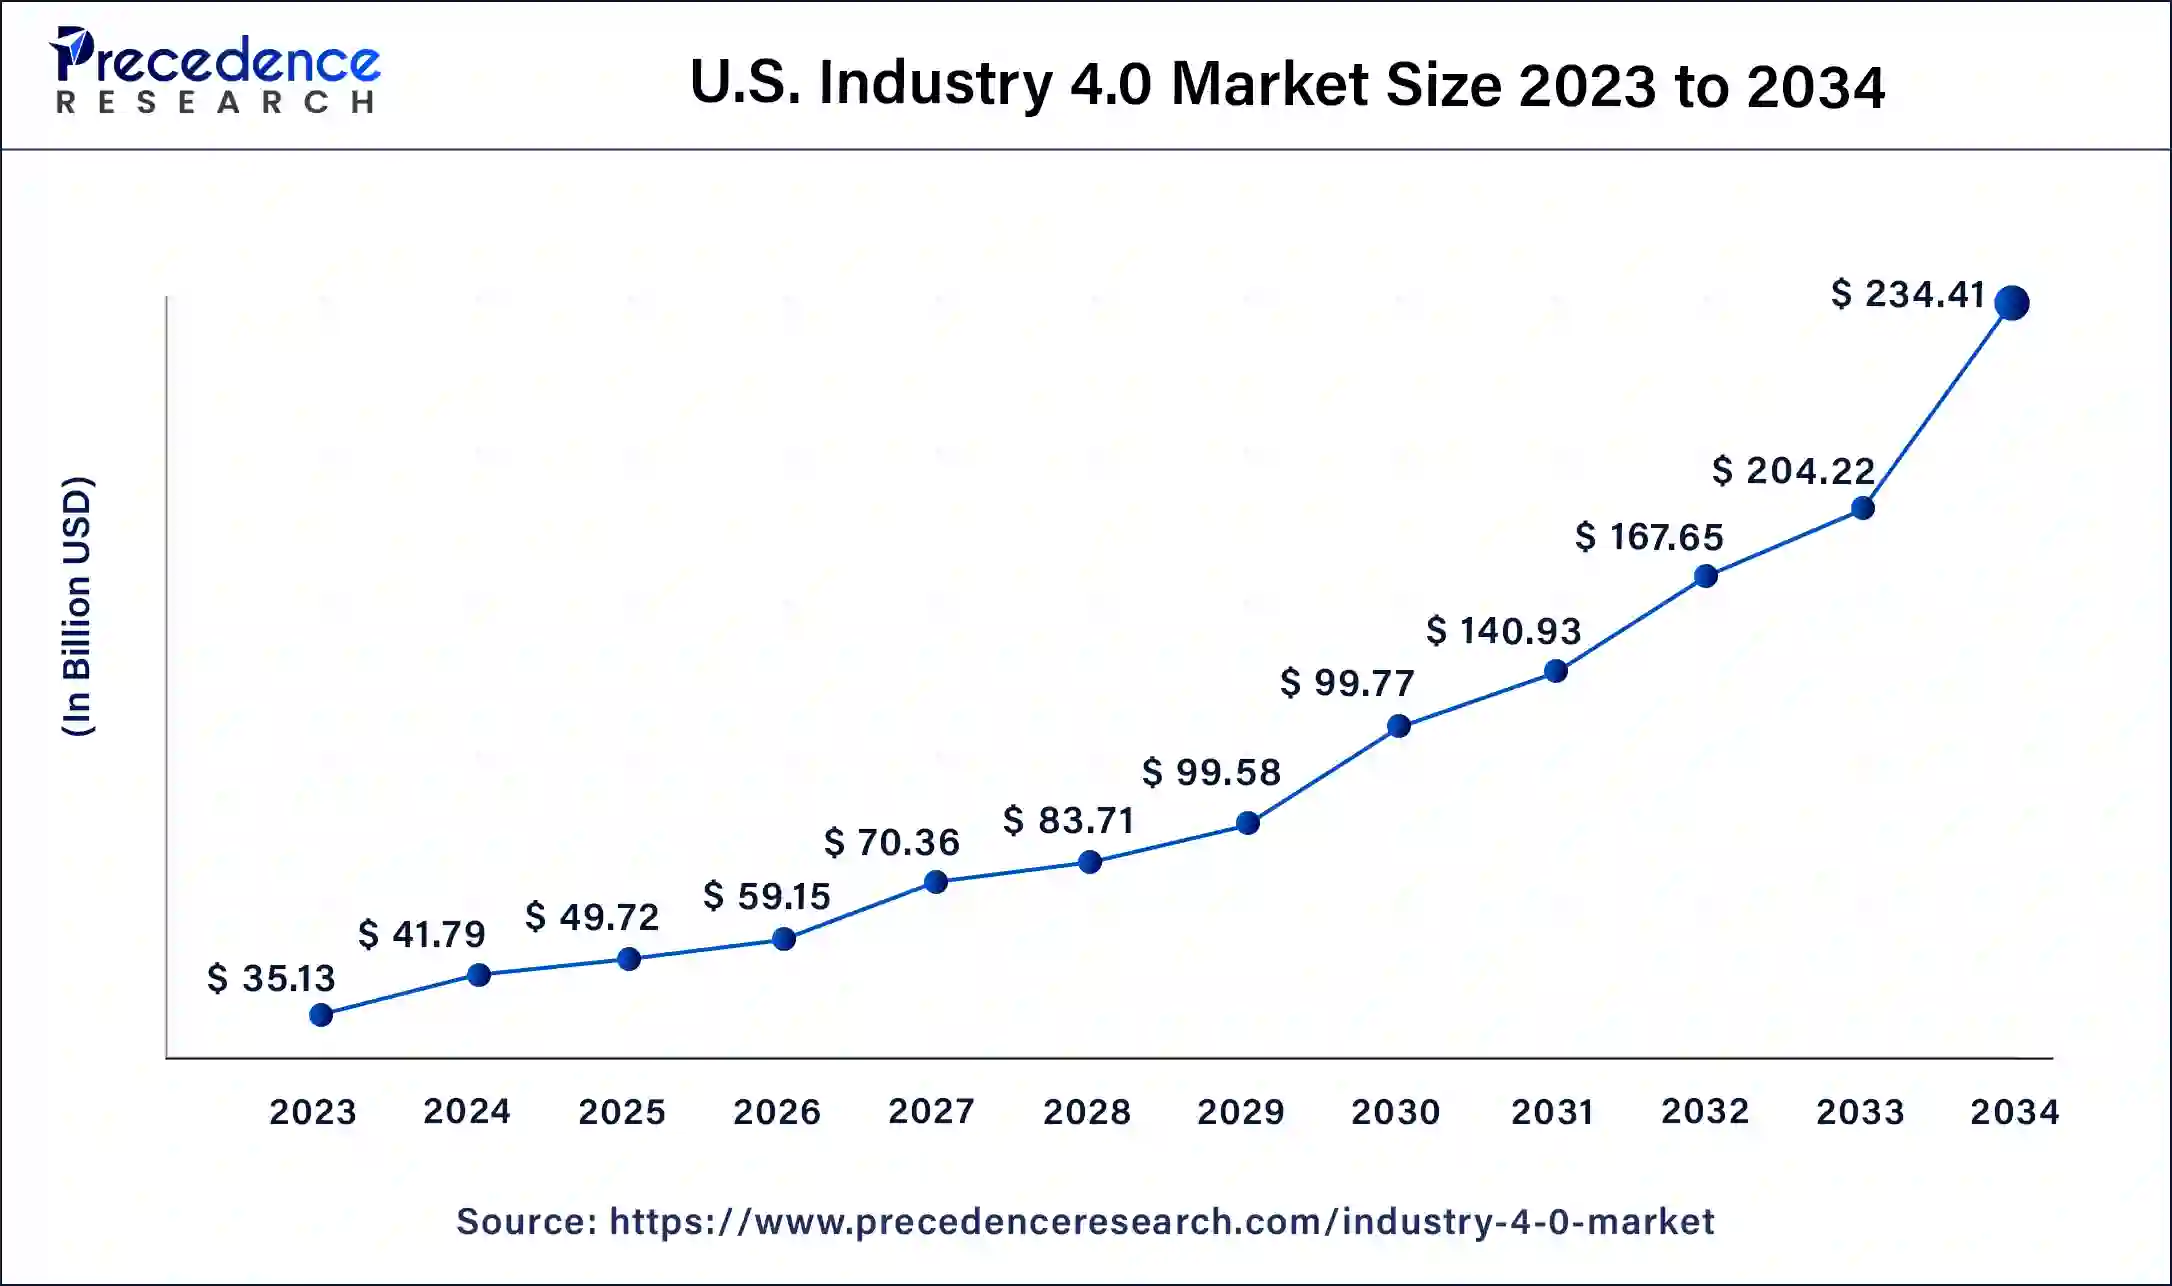 U.S. Industry 4.0 Market Size 2024 To 2034